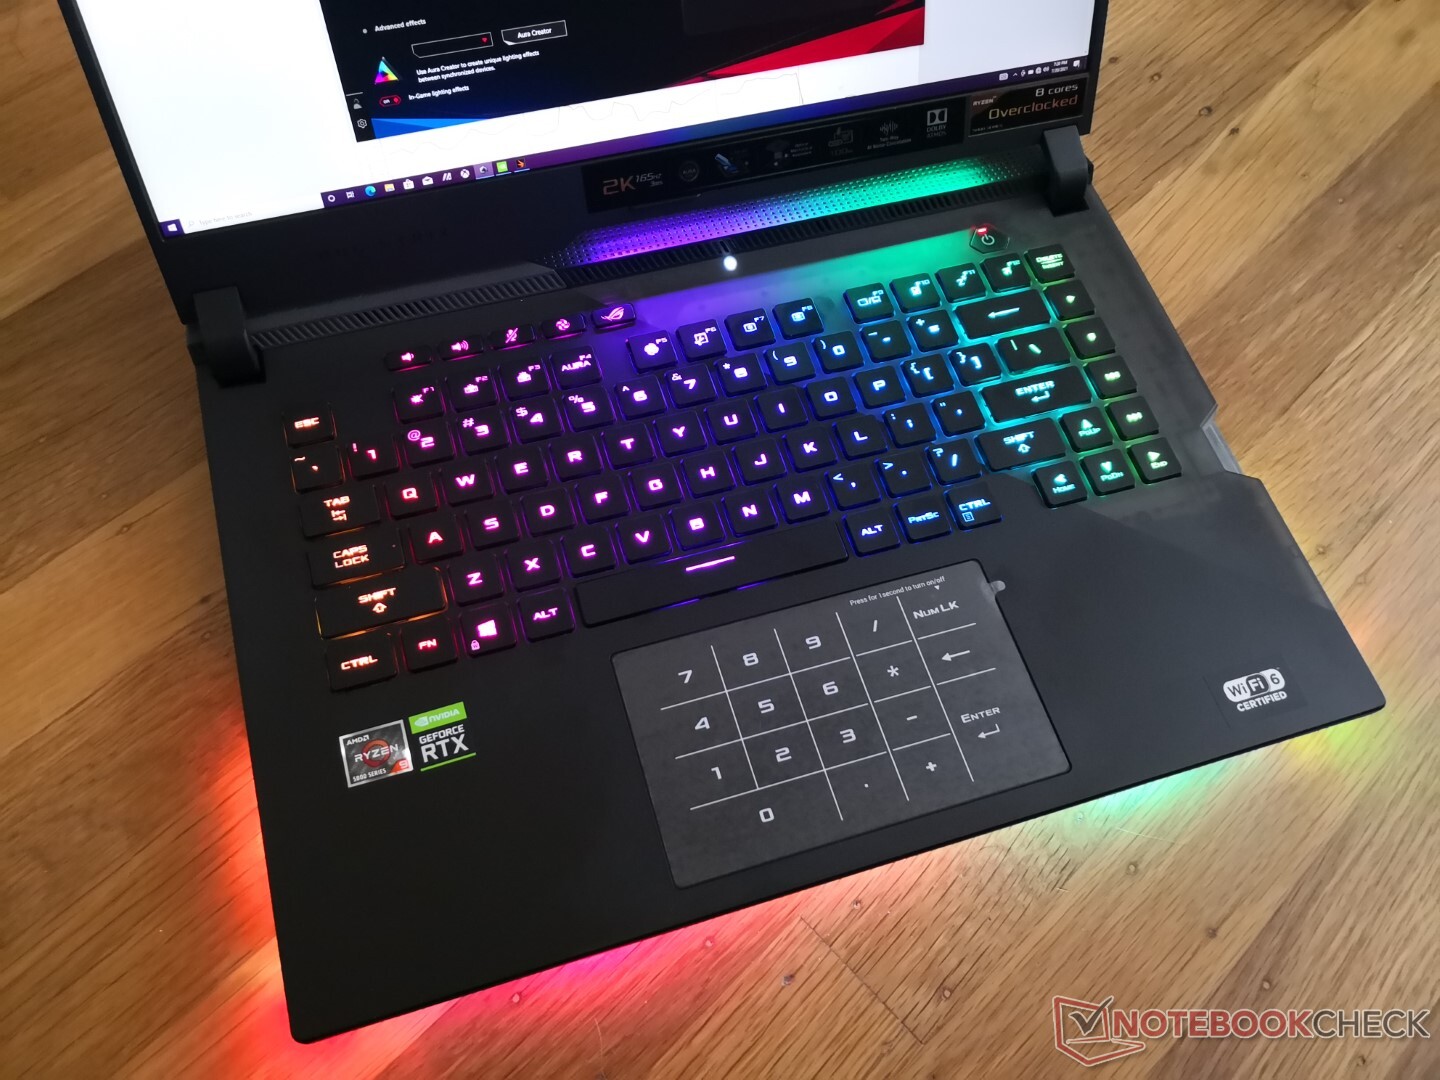 Asus ROG Strix Scar 15 G533 ships with a smaller 240 W AC adapter